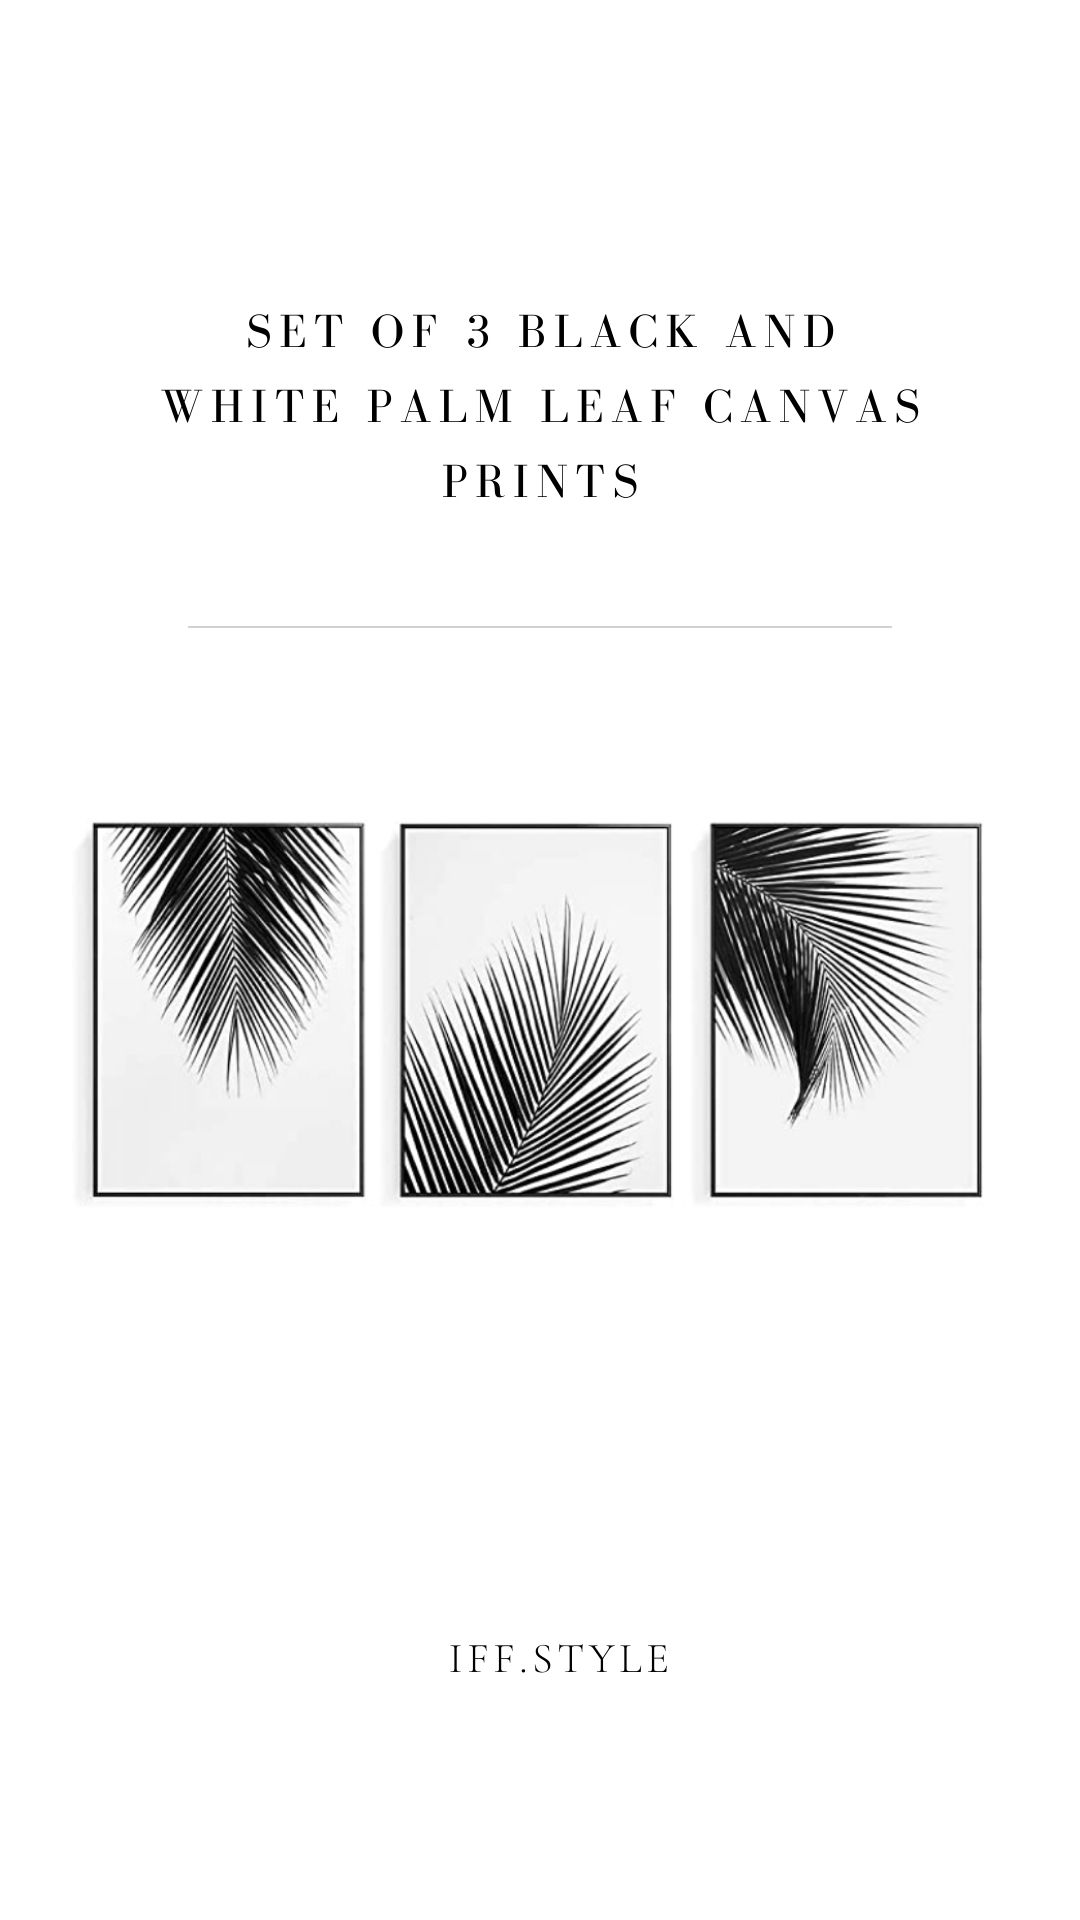 Pinterest Pin-Set of 3 boack and white plam leaf canvas prints